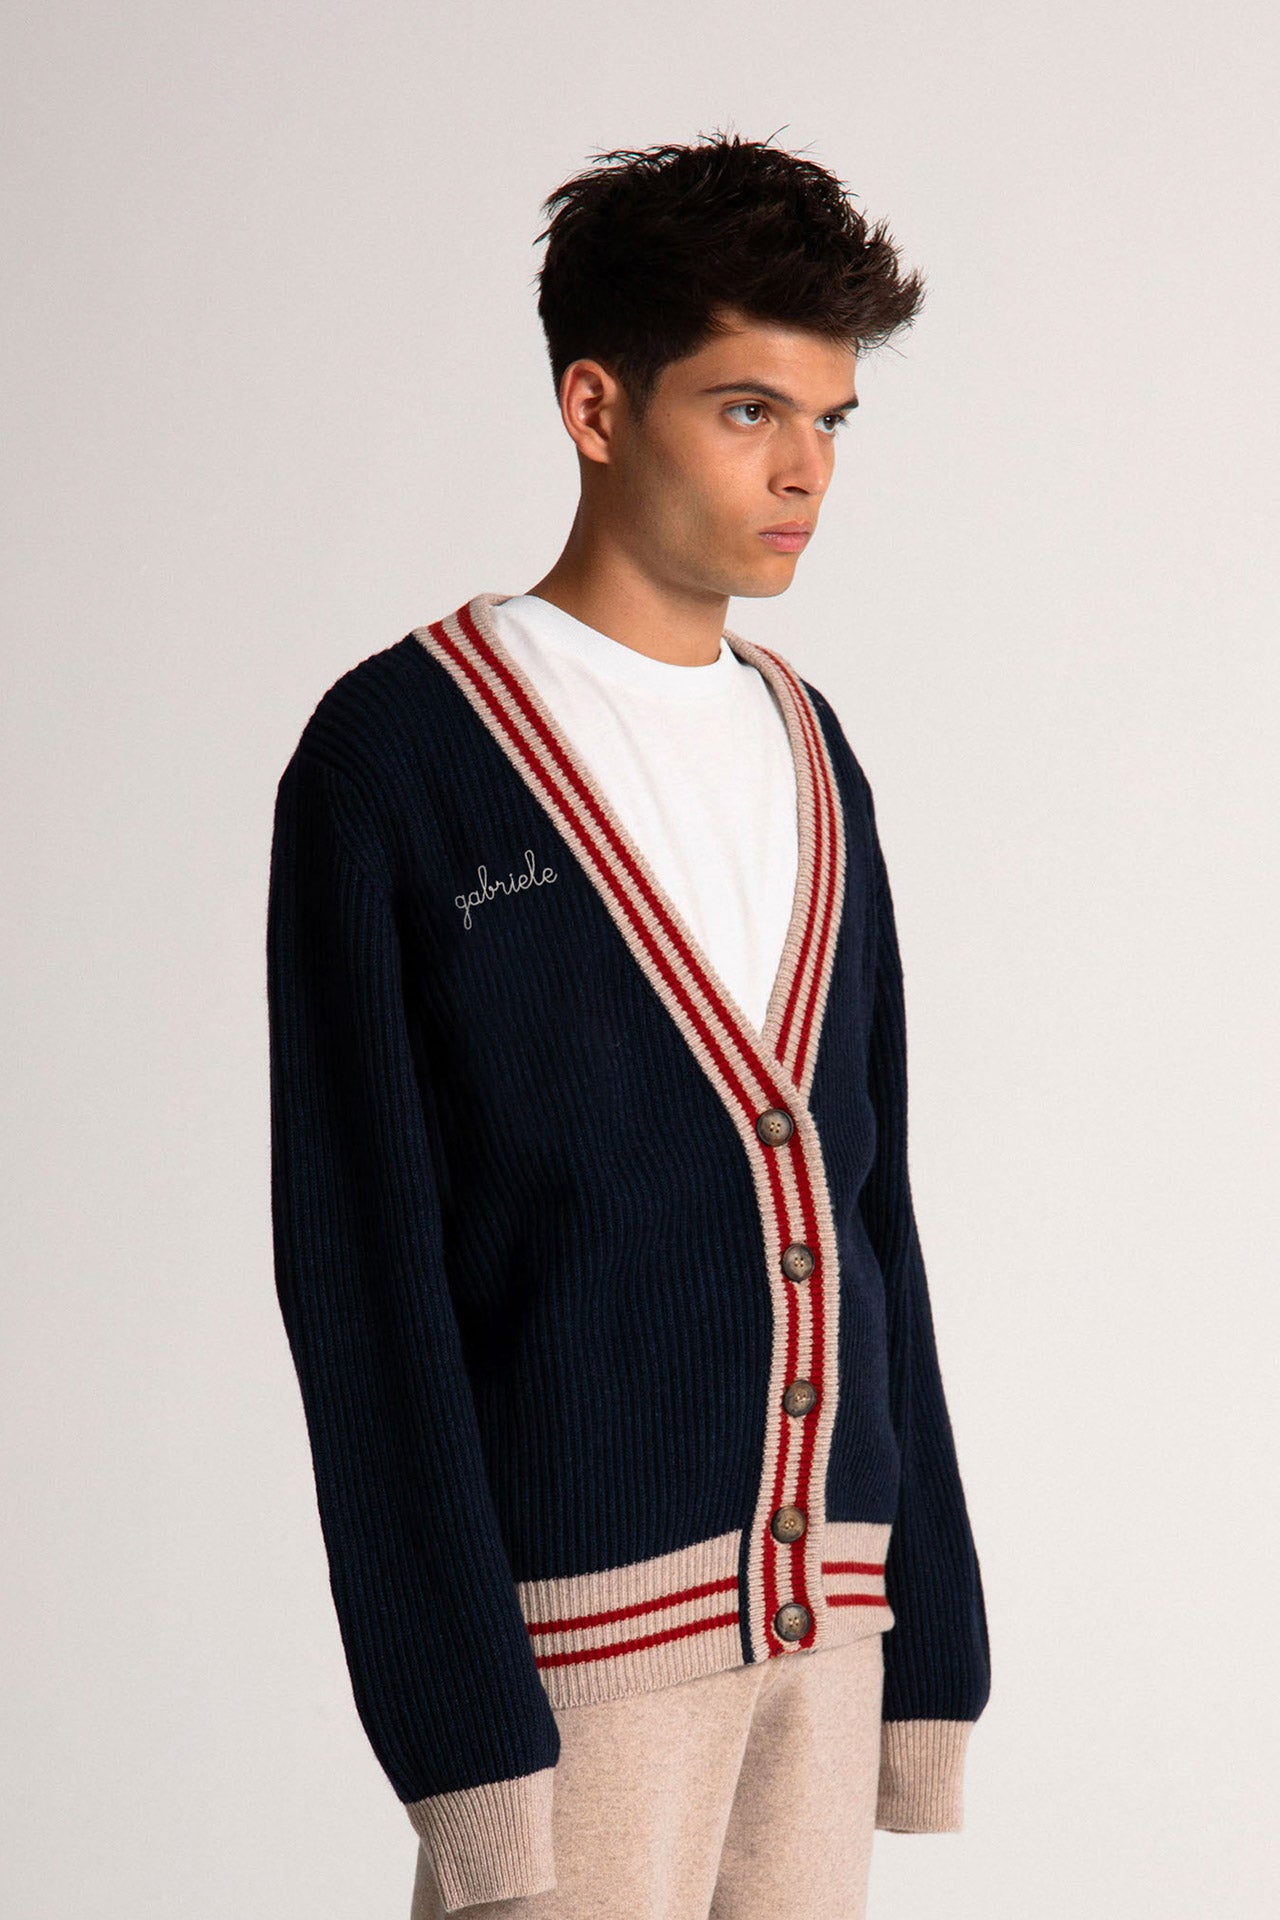 ULTIMA CHANCE - Stanford Cardigan - Prussia Blue